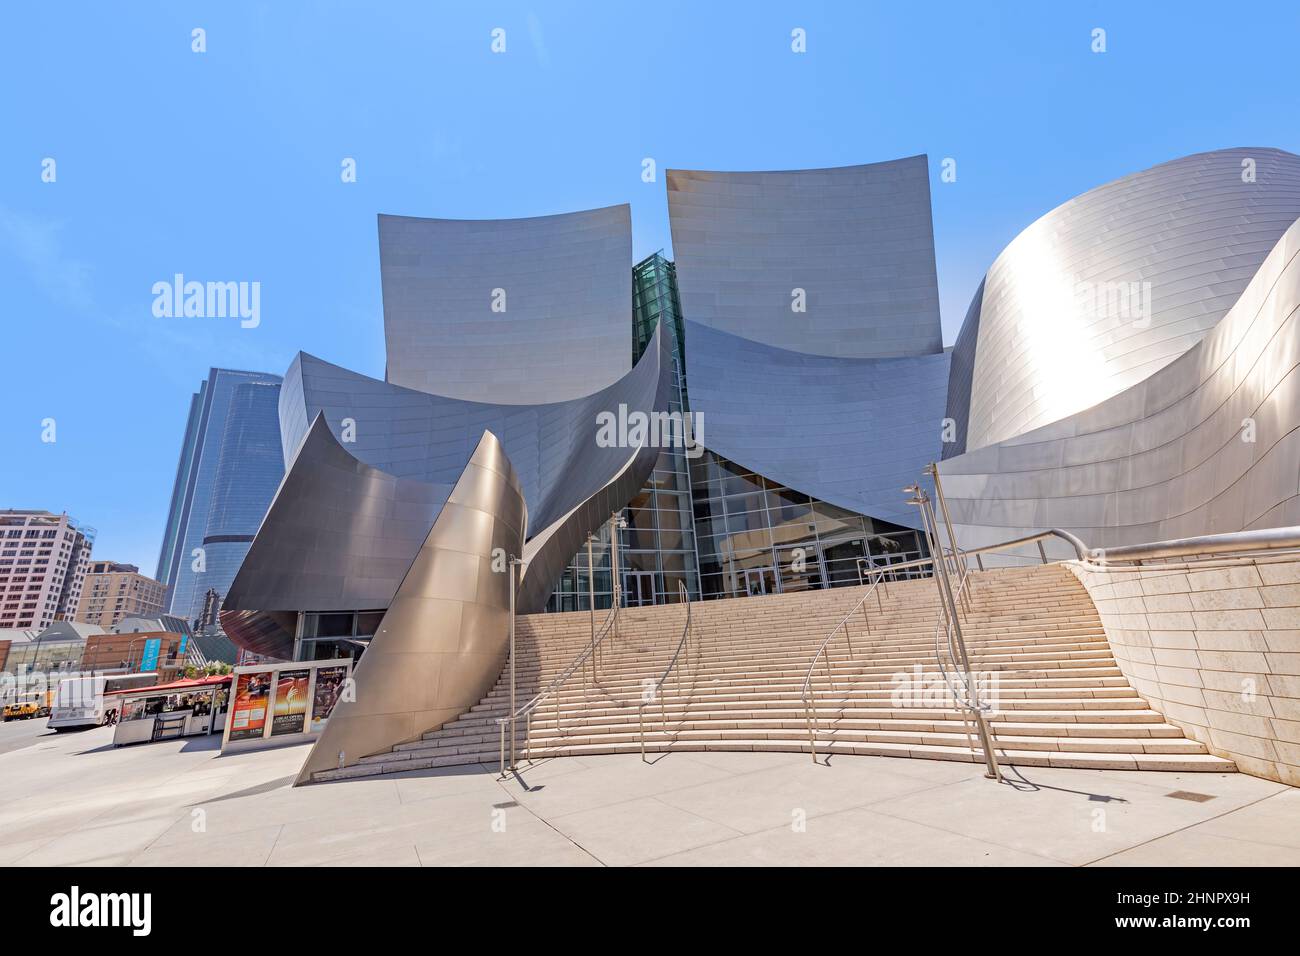 Walt Disney Concert Hall designed by architect Frank Gehry, is home of the Los Angeles Philharmonic orchestra and the Los Angeles Master Chorale Stock Photo